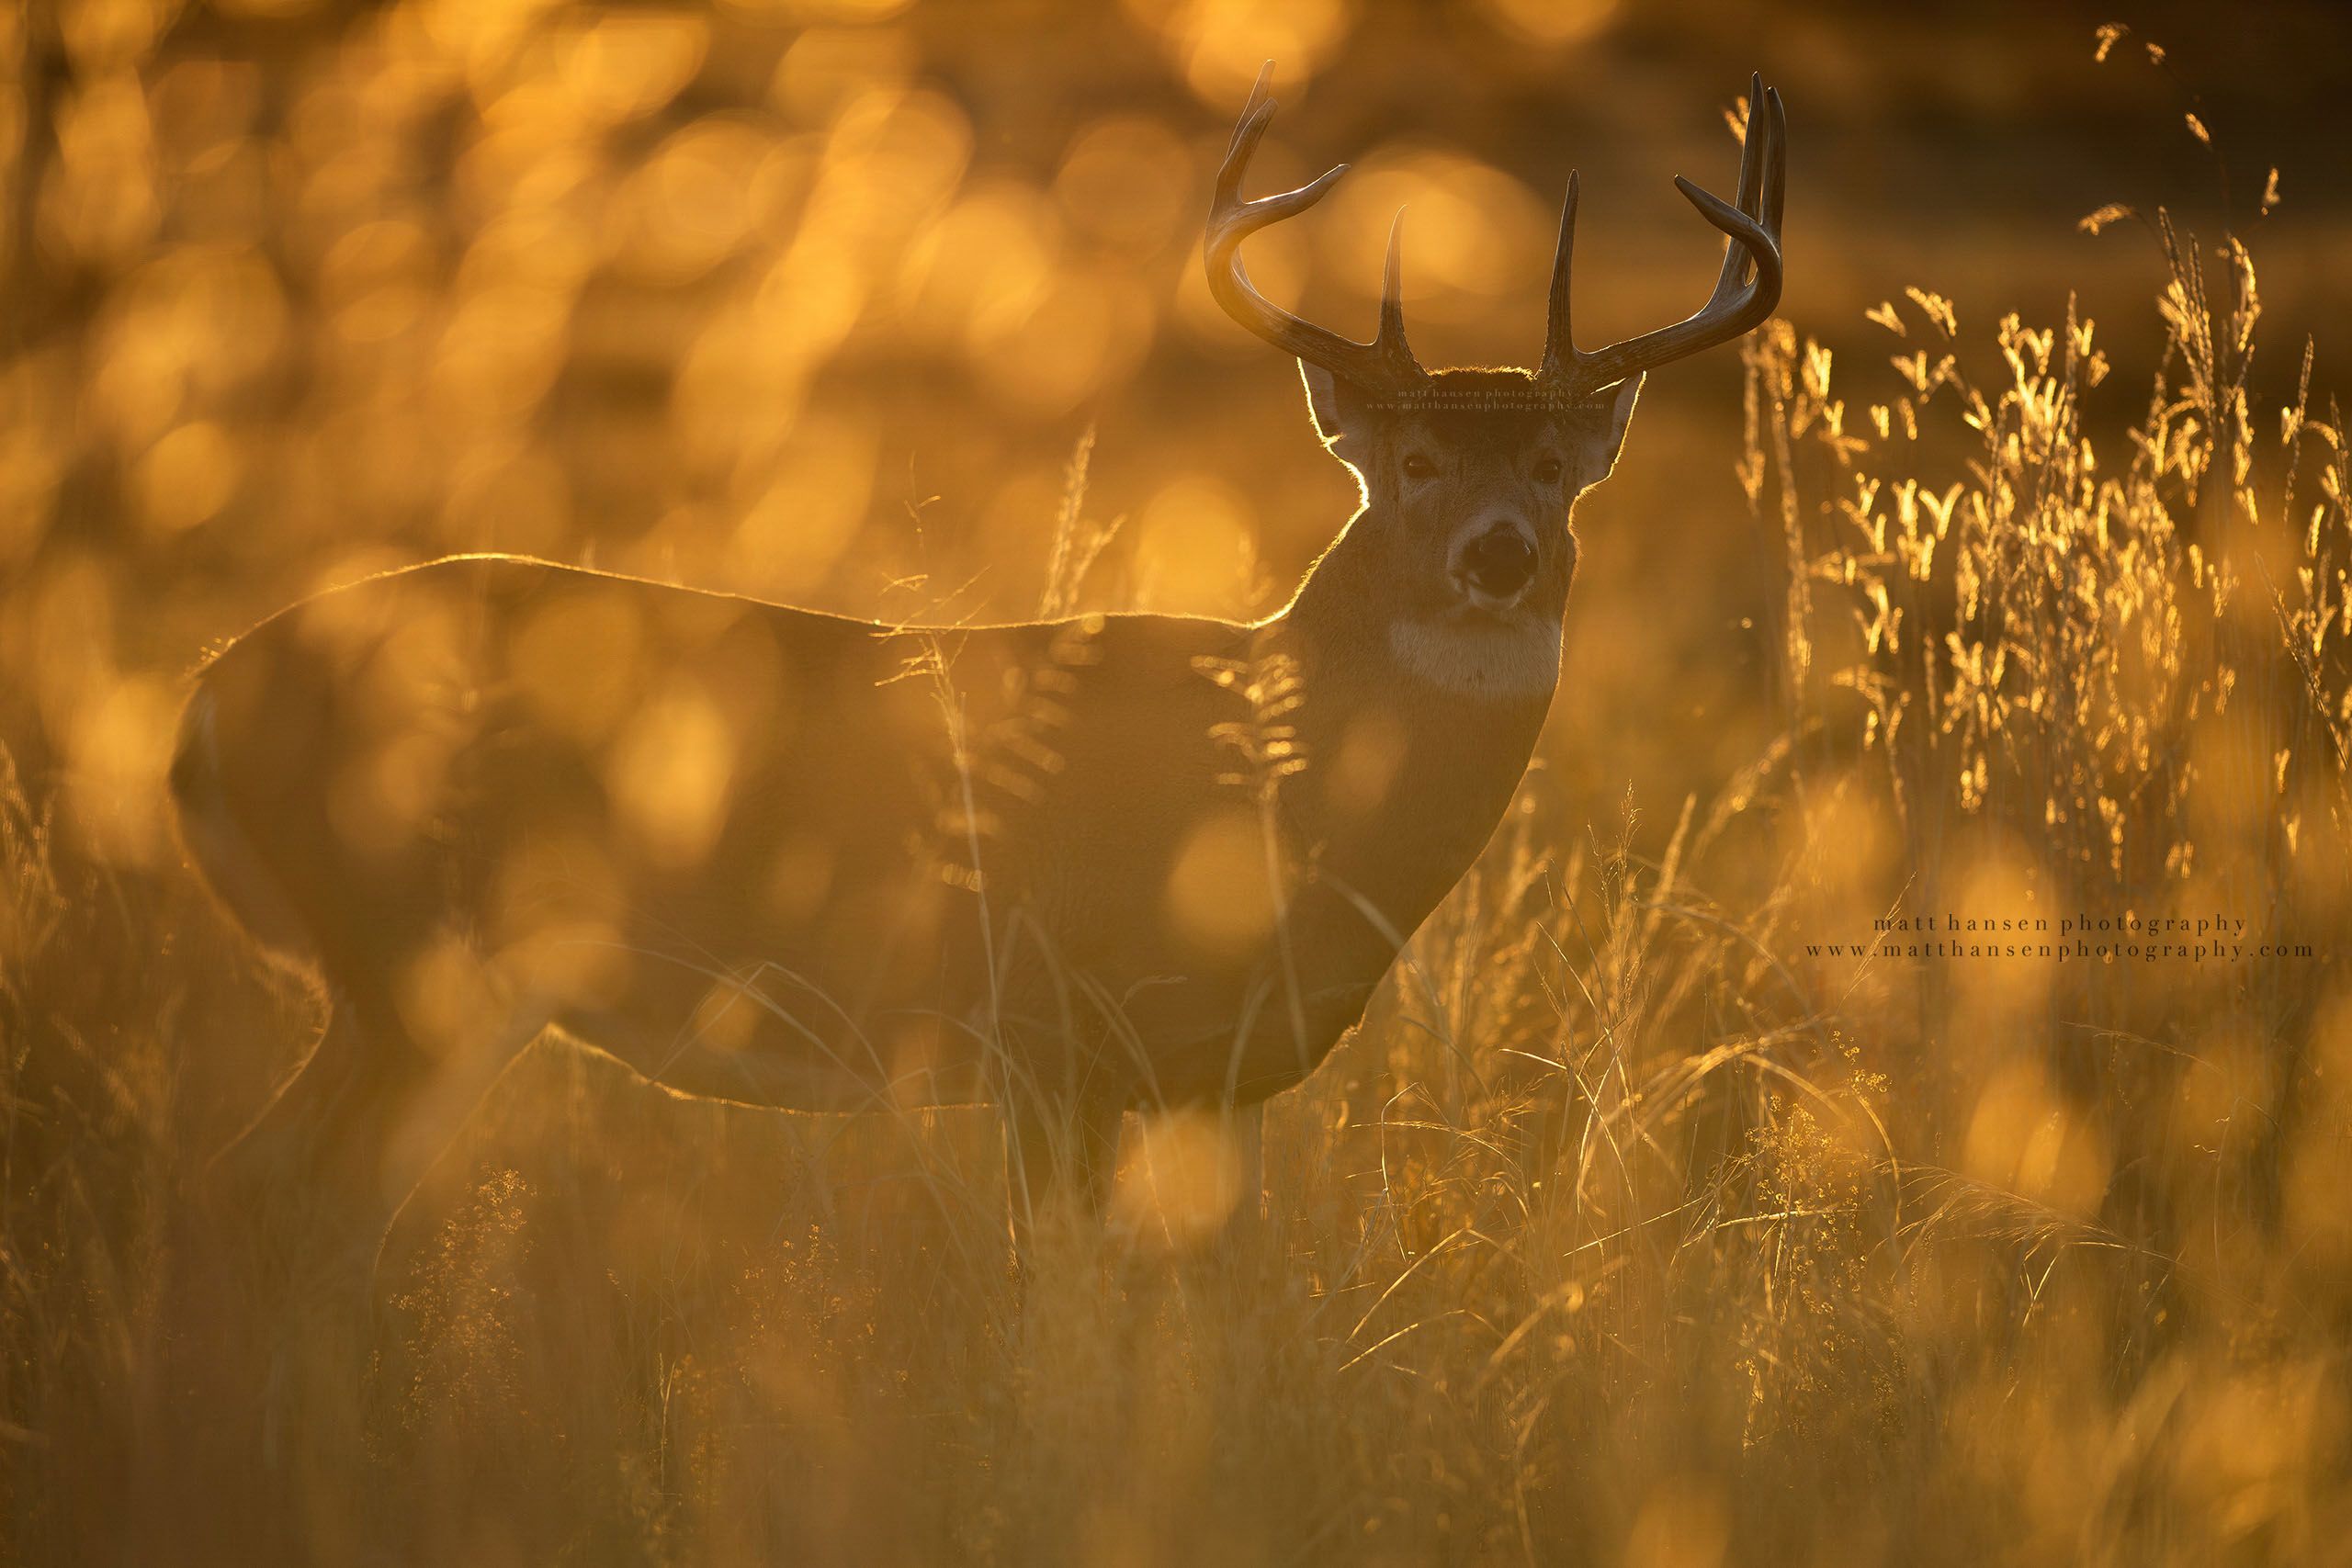 Whitetail Deer Photography